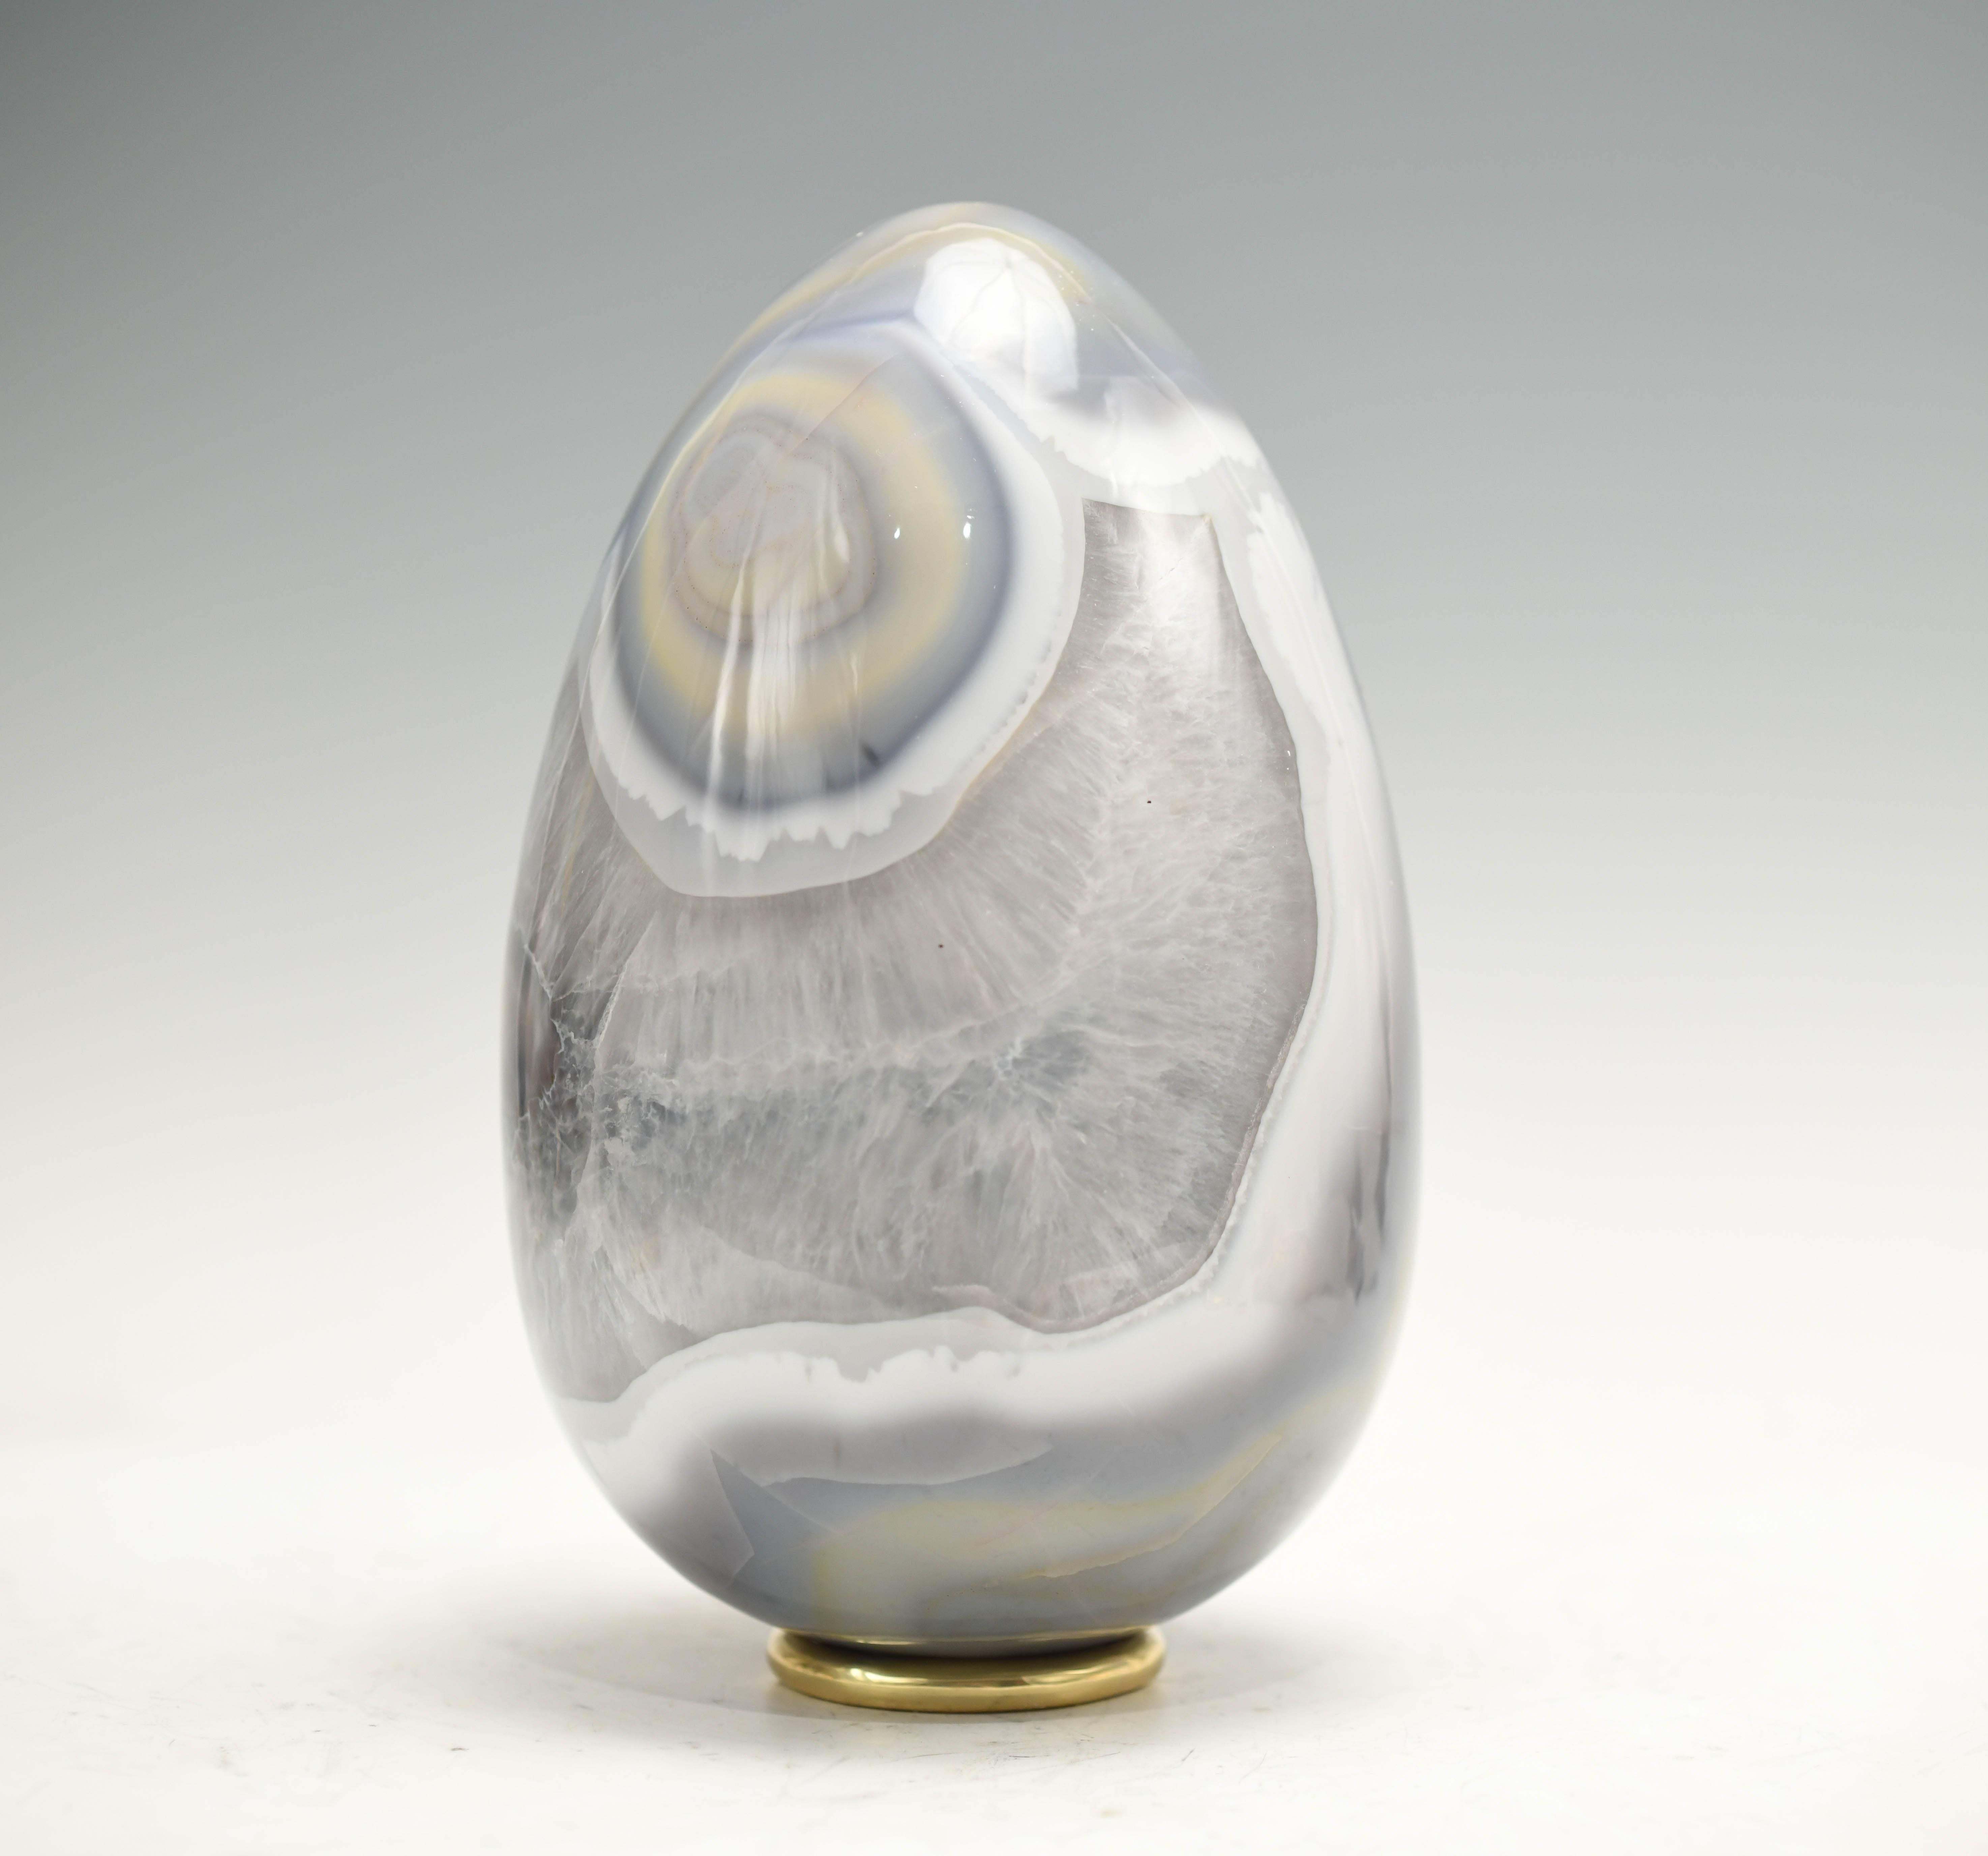 A rare fine carved elegant form agate sculpture, created by Phoenix Gallery, NYC.
